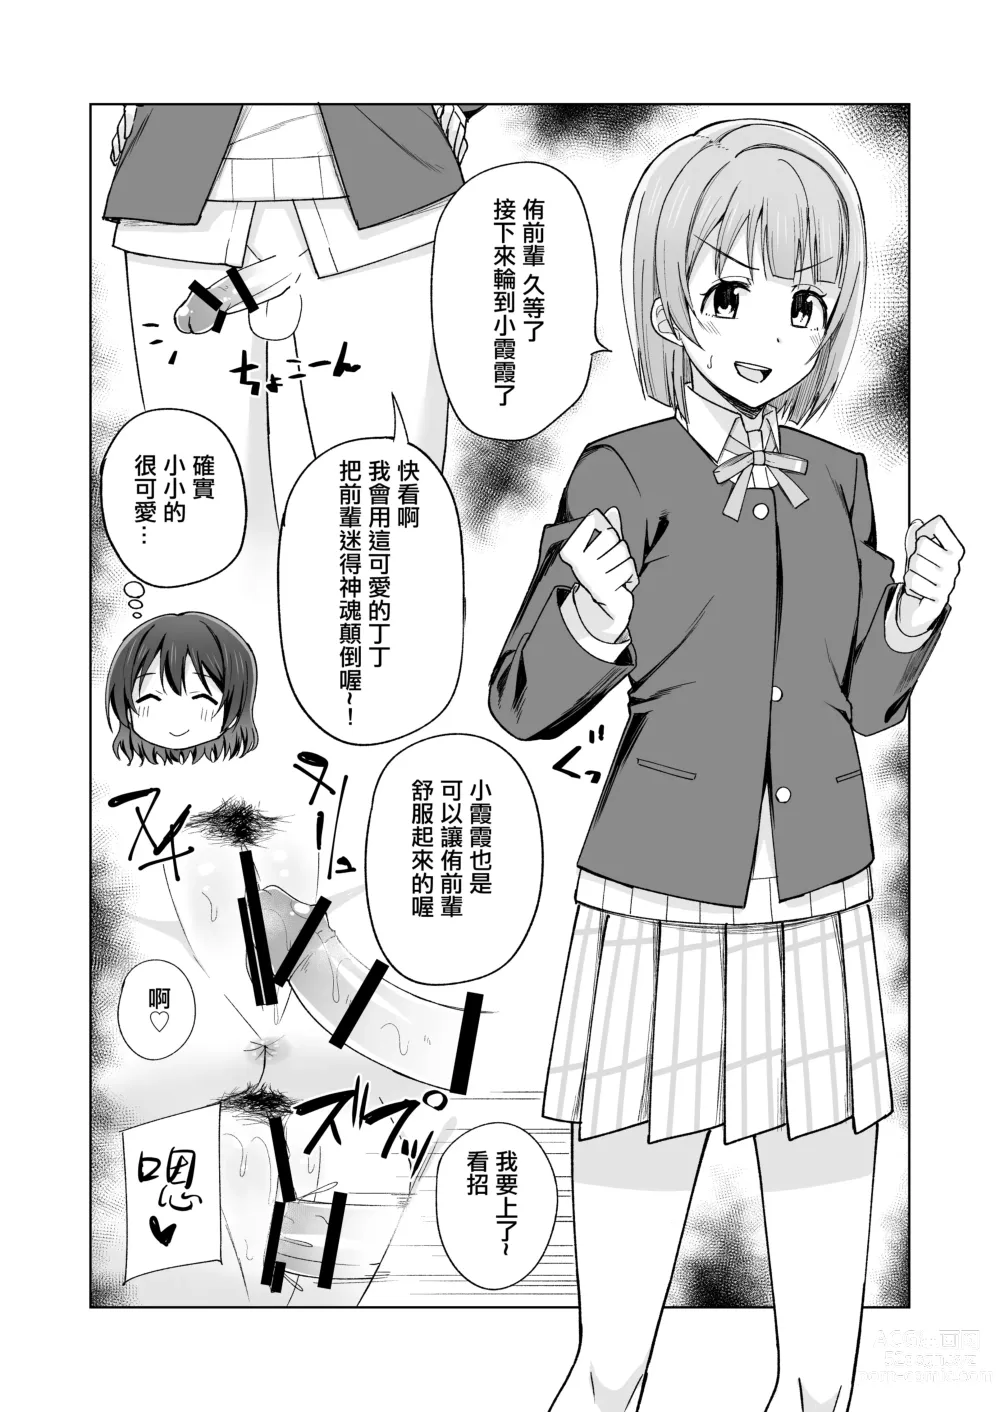 Page 21 of doujinshi 誕生的悸動